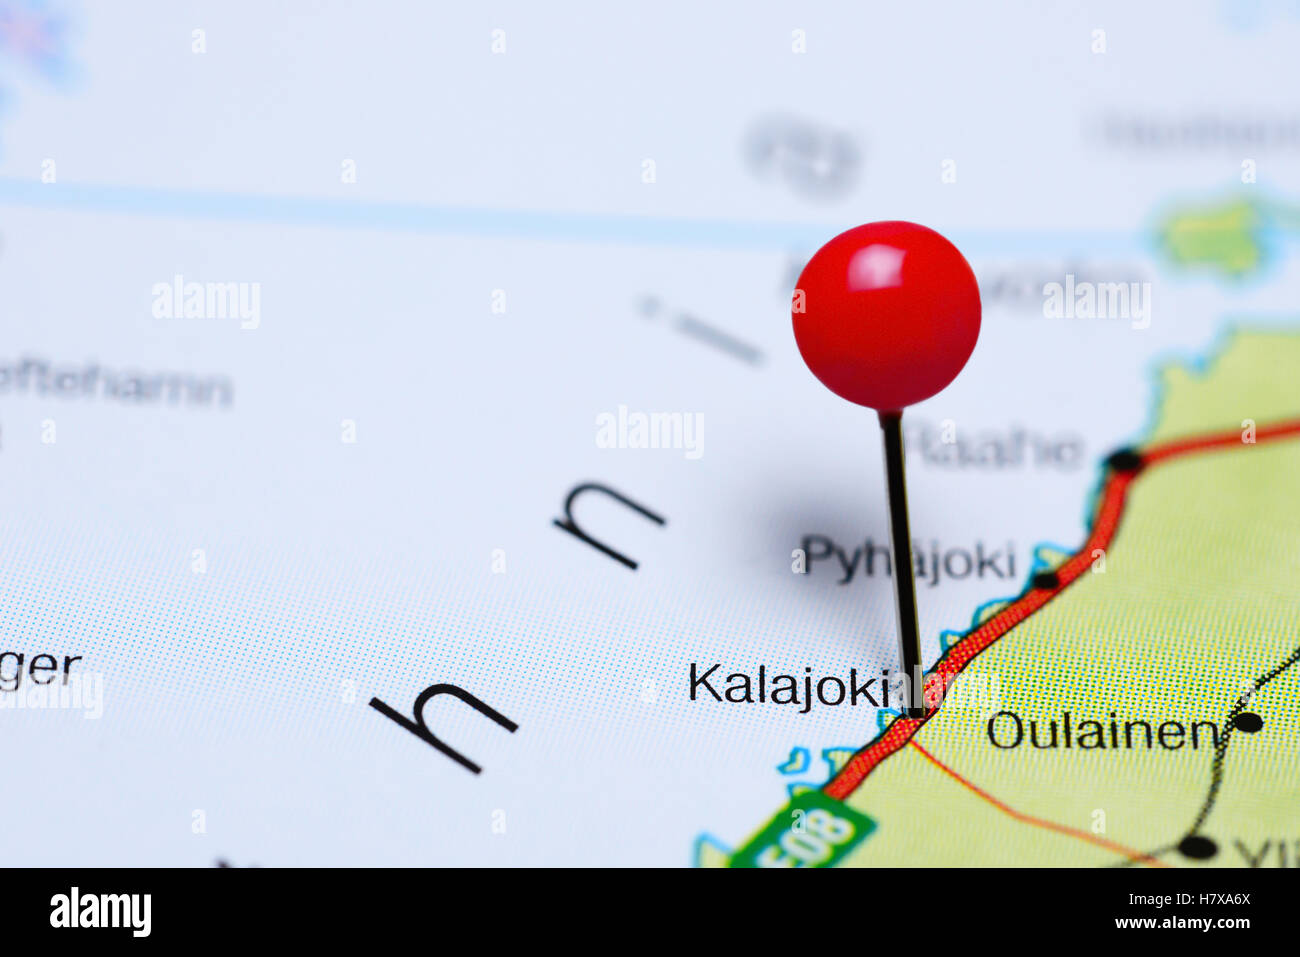 Kalajoki pinned on a map of Finland Stock Photo